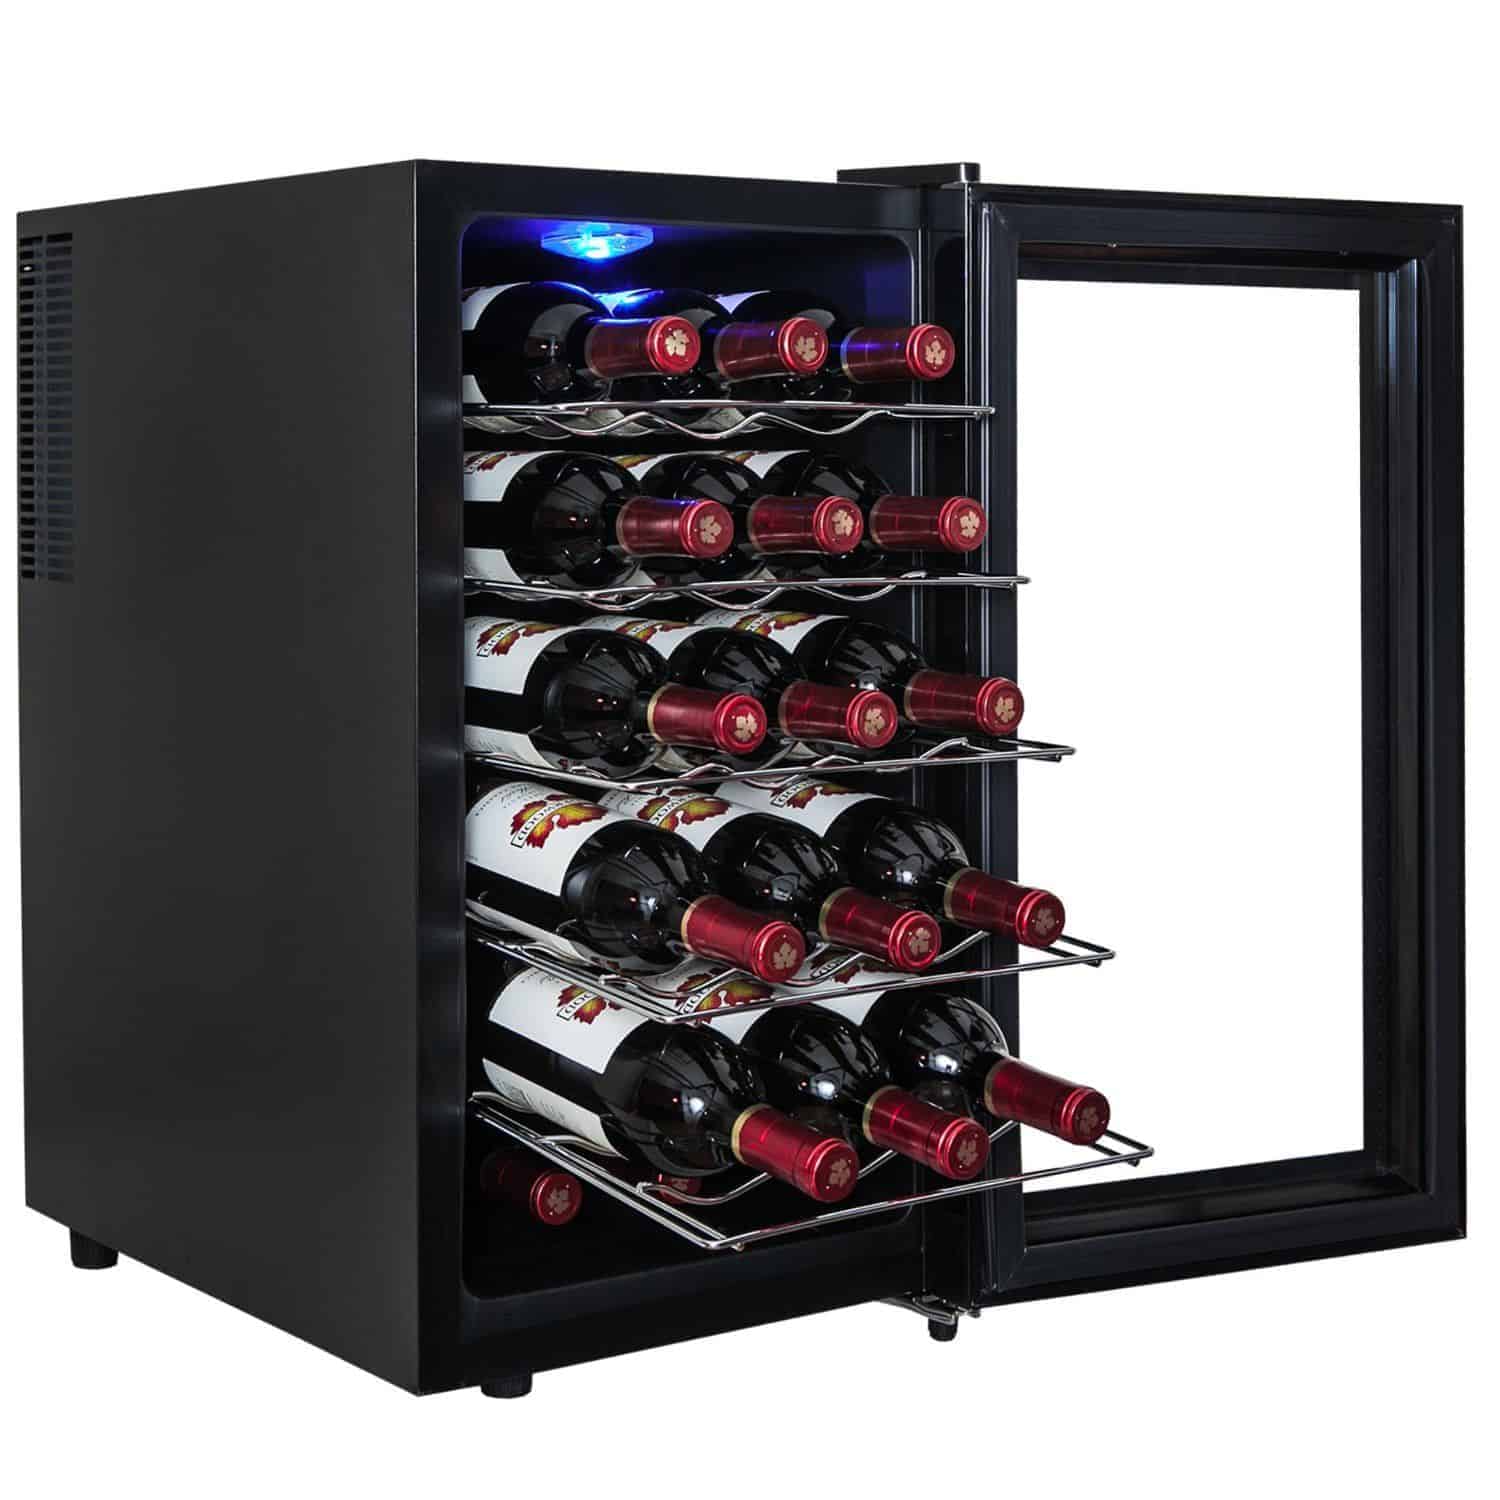 AKDY® 18 Bottle Single Zone Thermoelectric Freestanding Wine Cooler Cellar